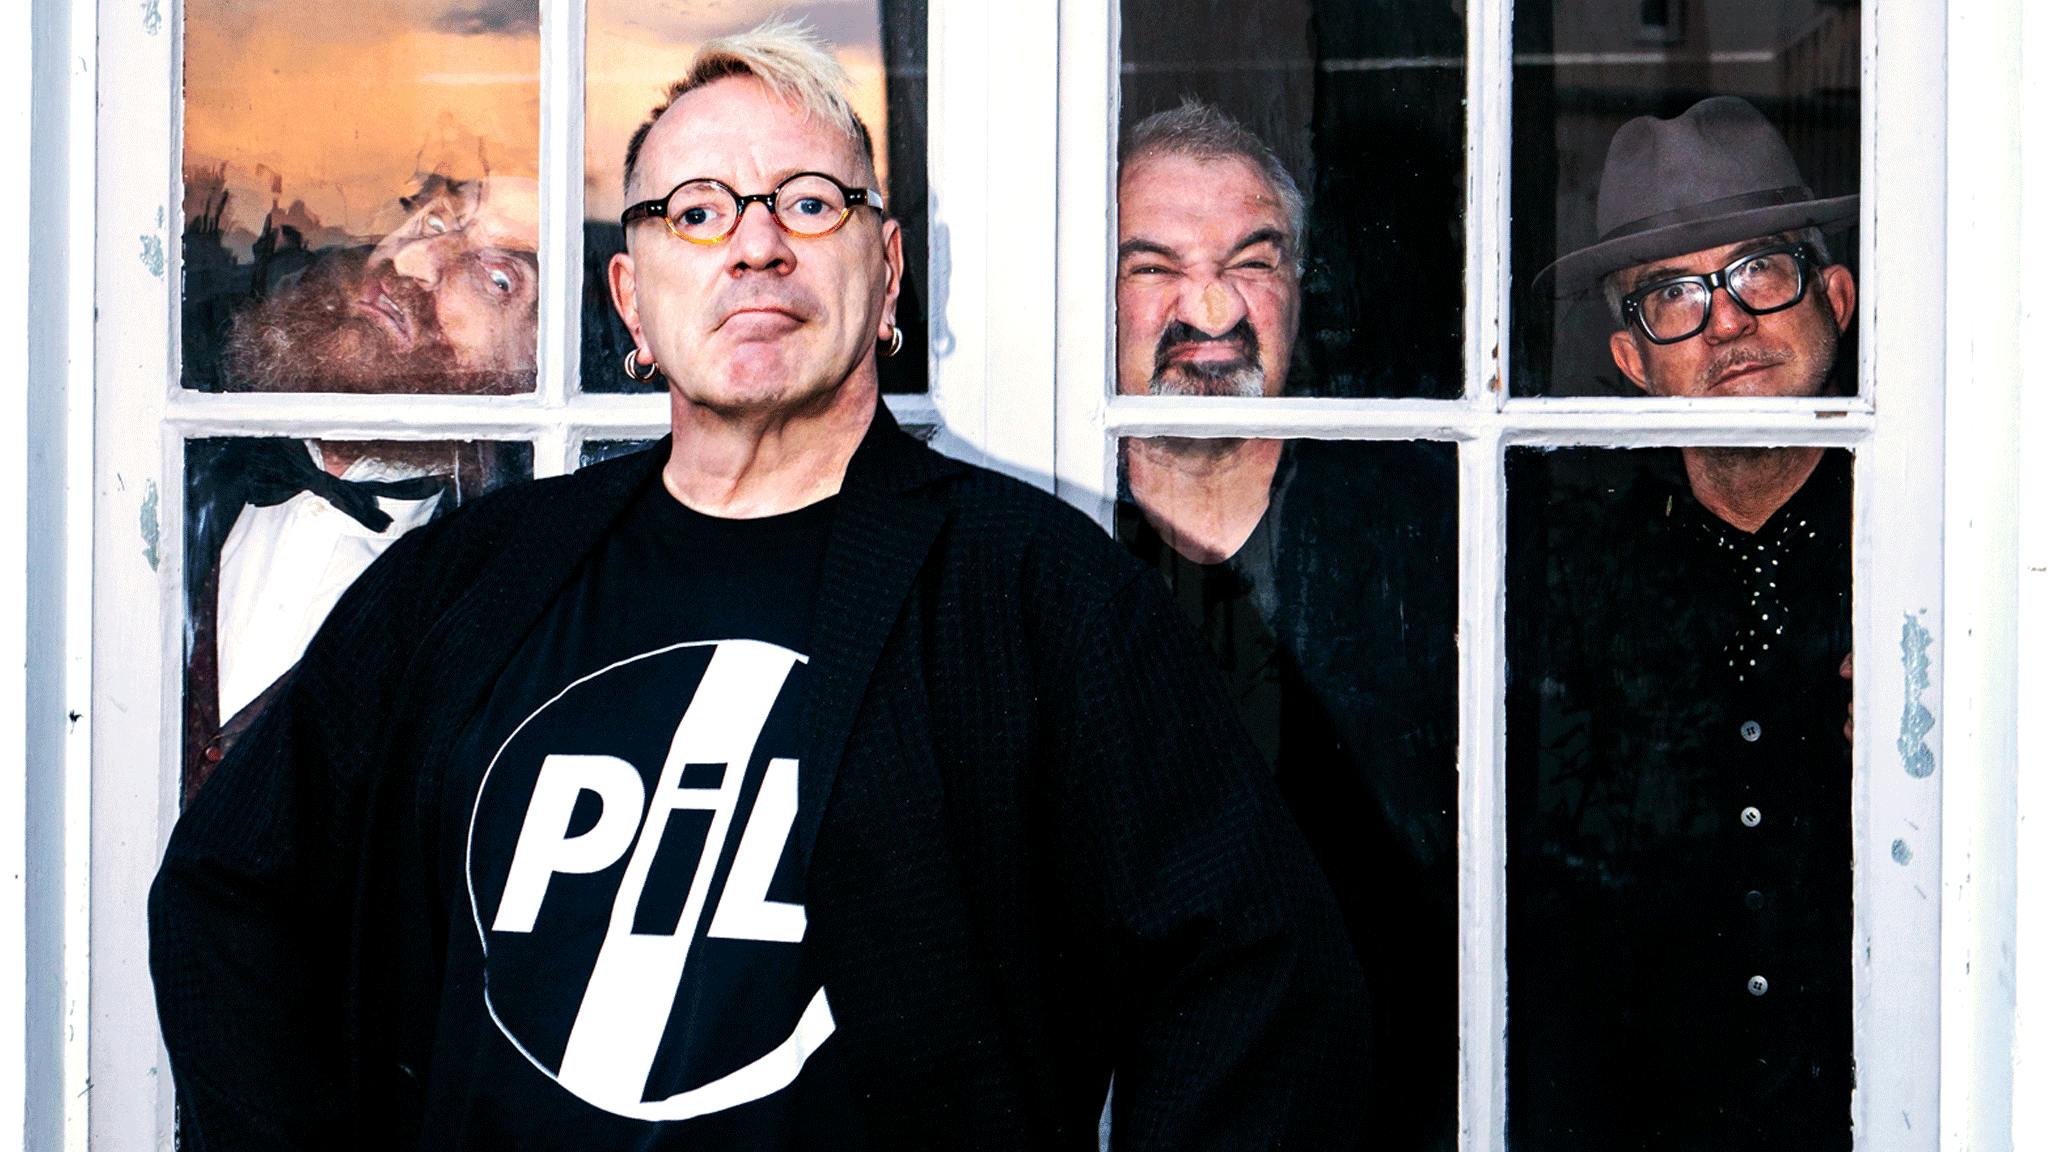 John Lydon’s Public Image Ltd. are competing to represent Ireland at Eurovision 2023